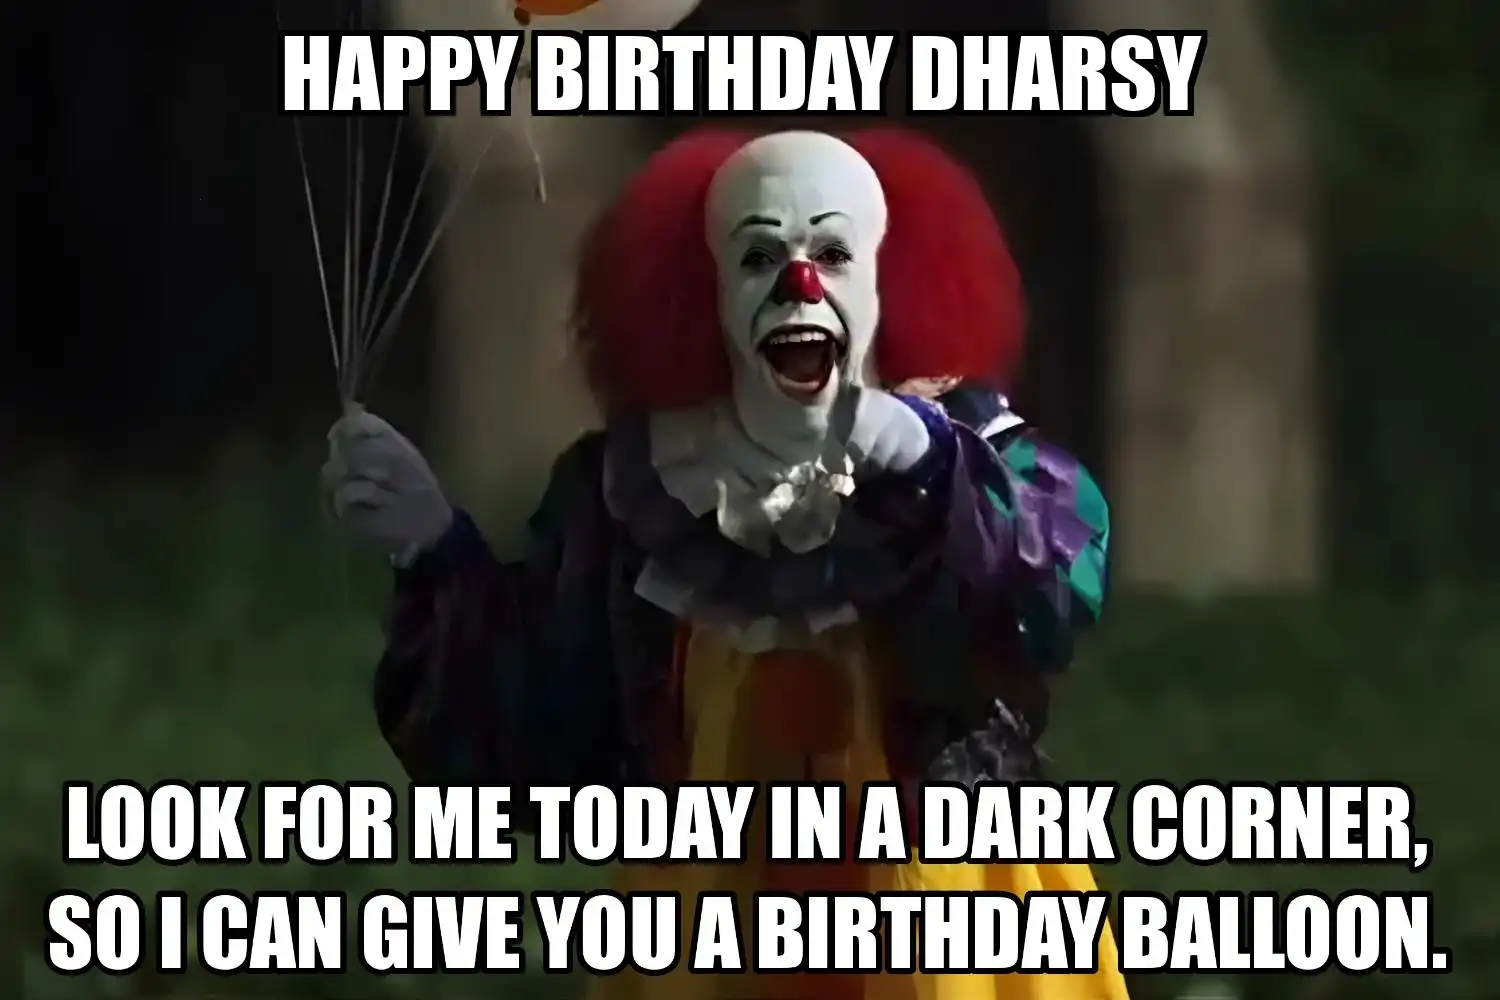 Happy Birthday Dharsy I Can Give You A Balloon Meme